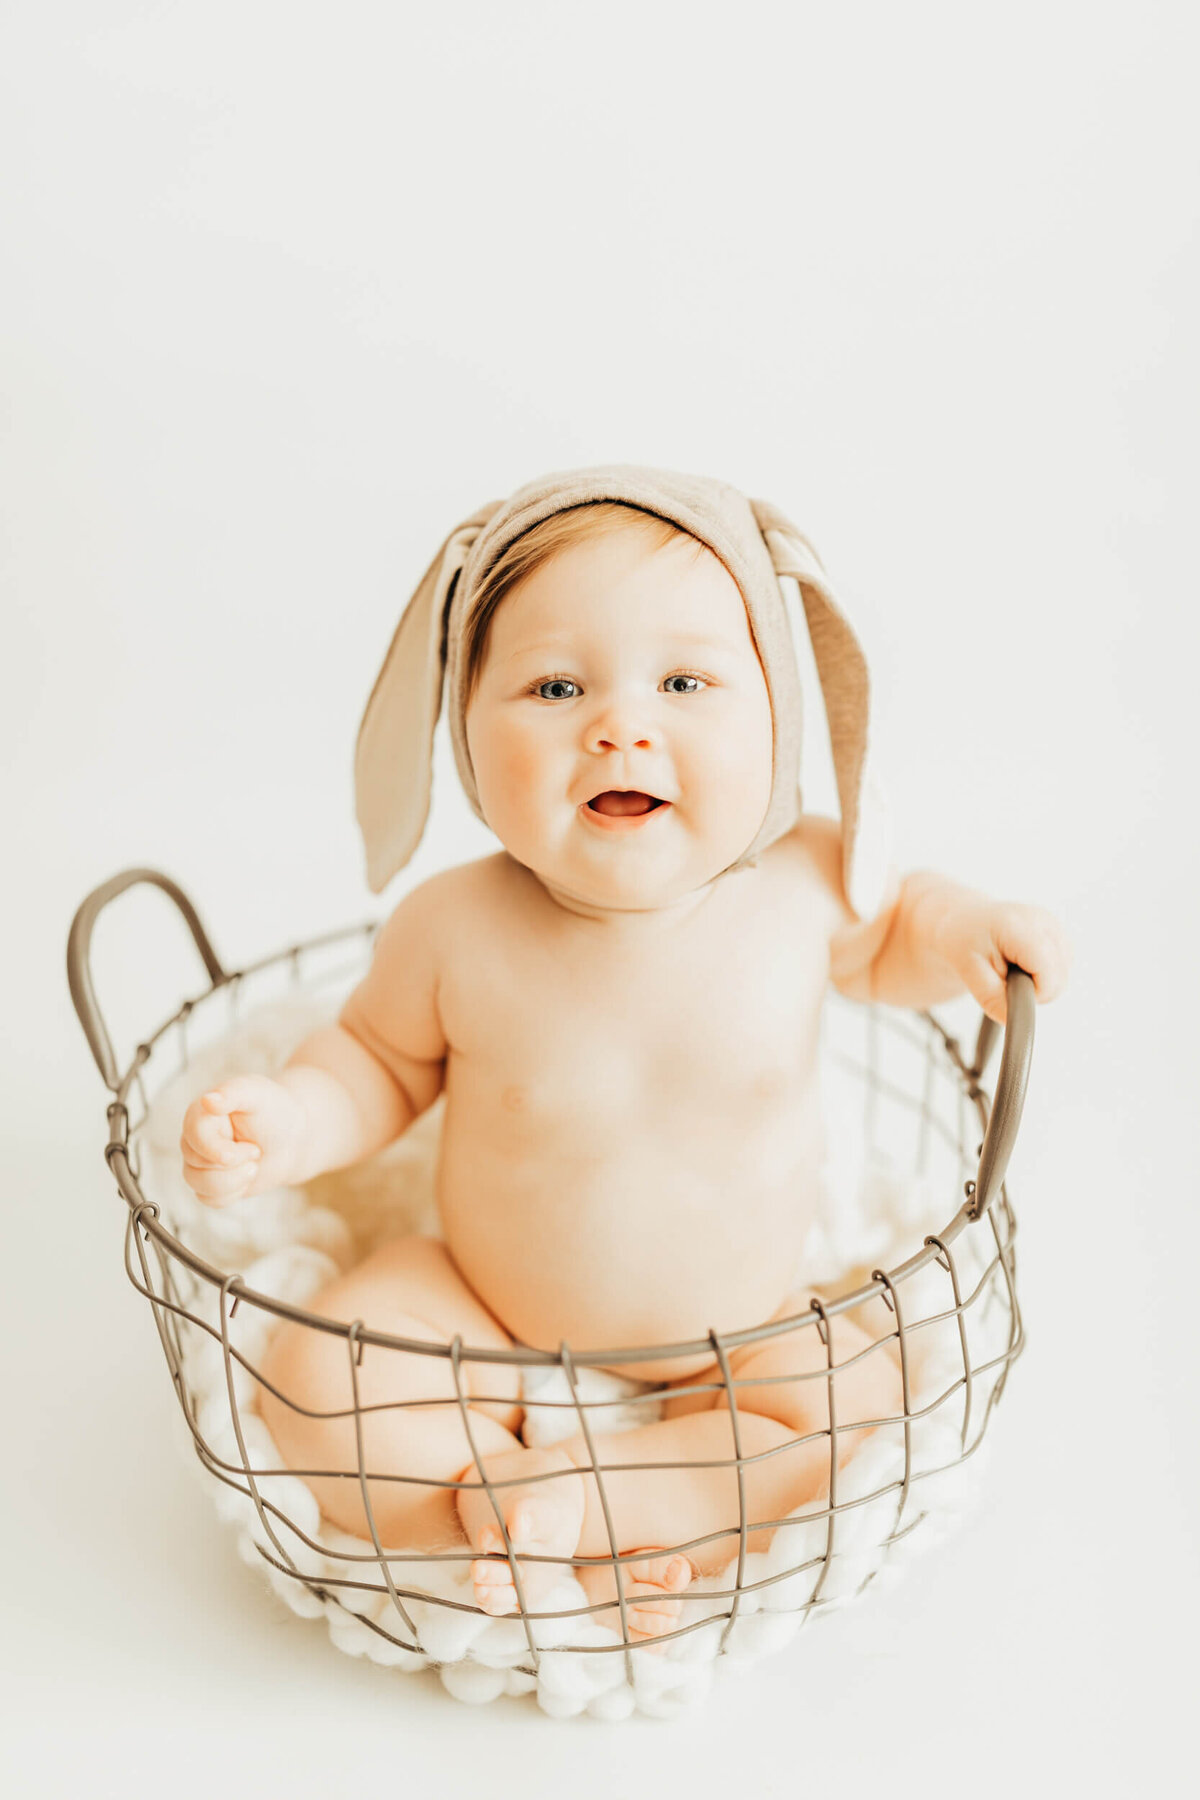 little girl wearing a bunny eared hat, sitting in wire basket on white backdrop for ally's photographyl